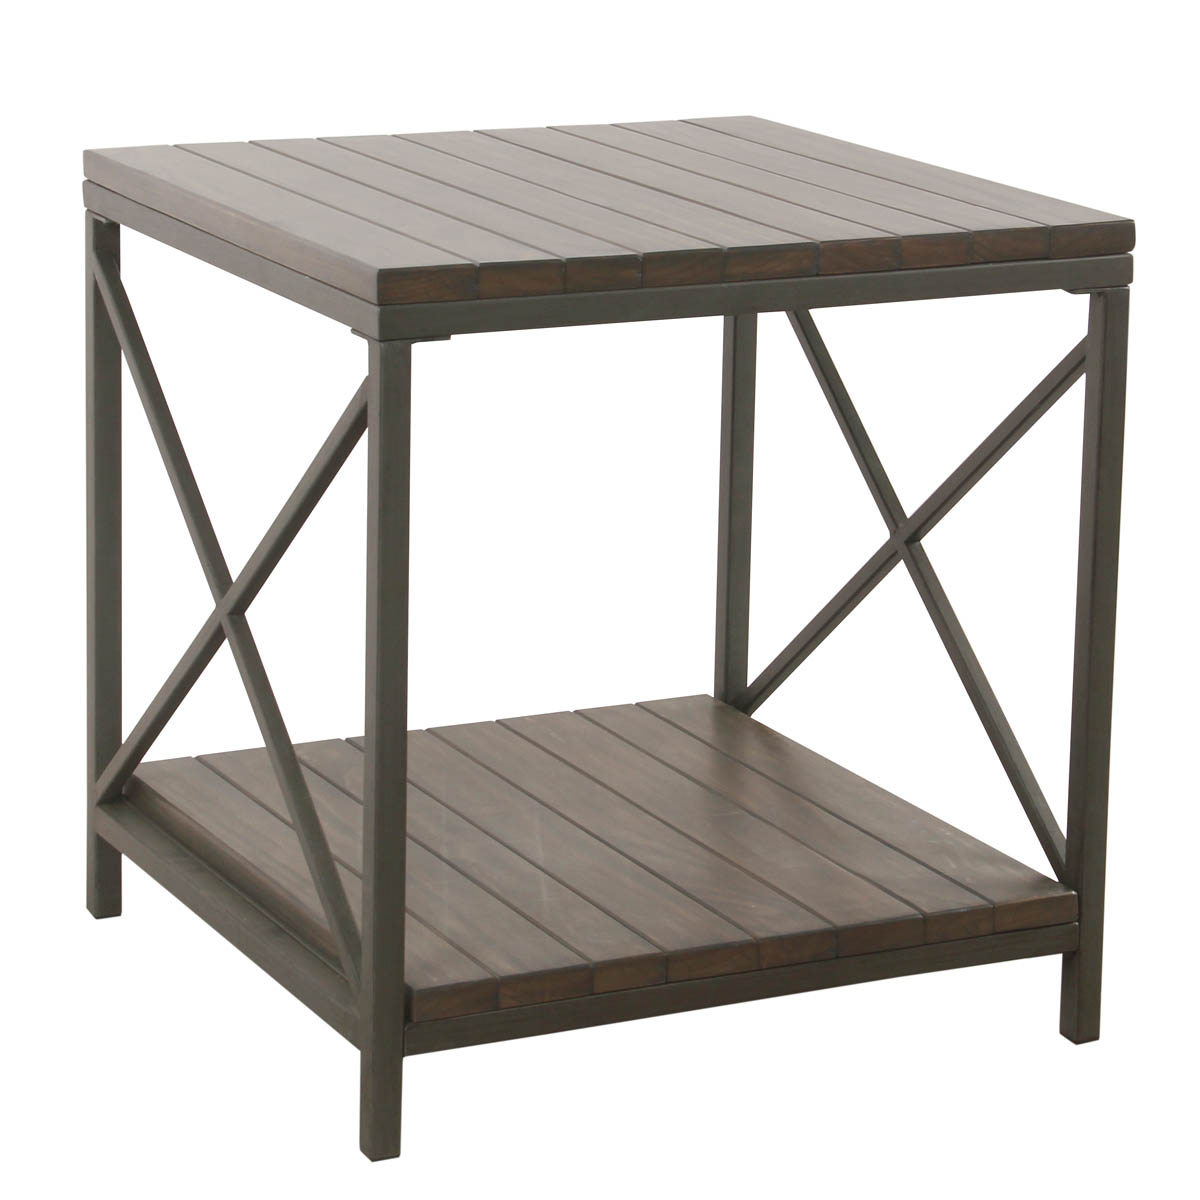 unique shaped coffee tables probably outrageous amazing gray wood homepop and metal accent table patina front end ikea storage baskets inch furniture legs white gold runner fine